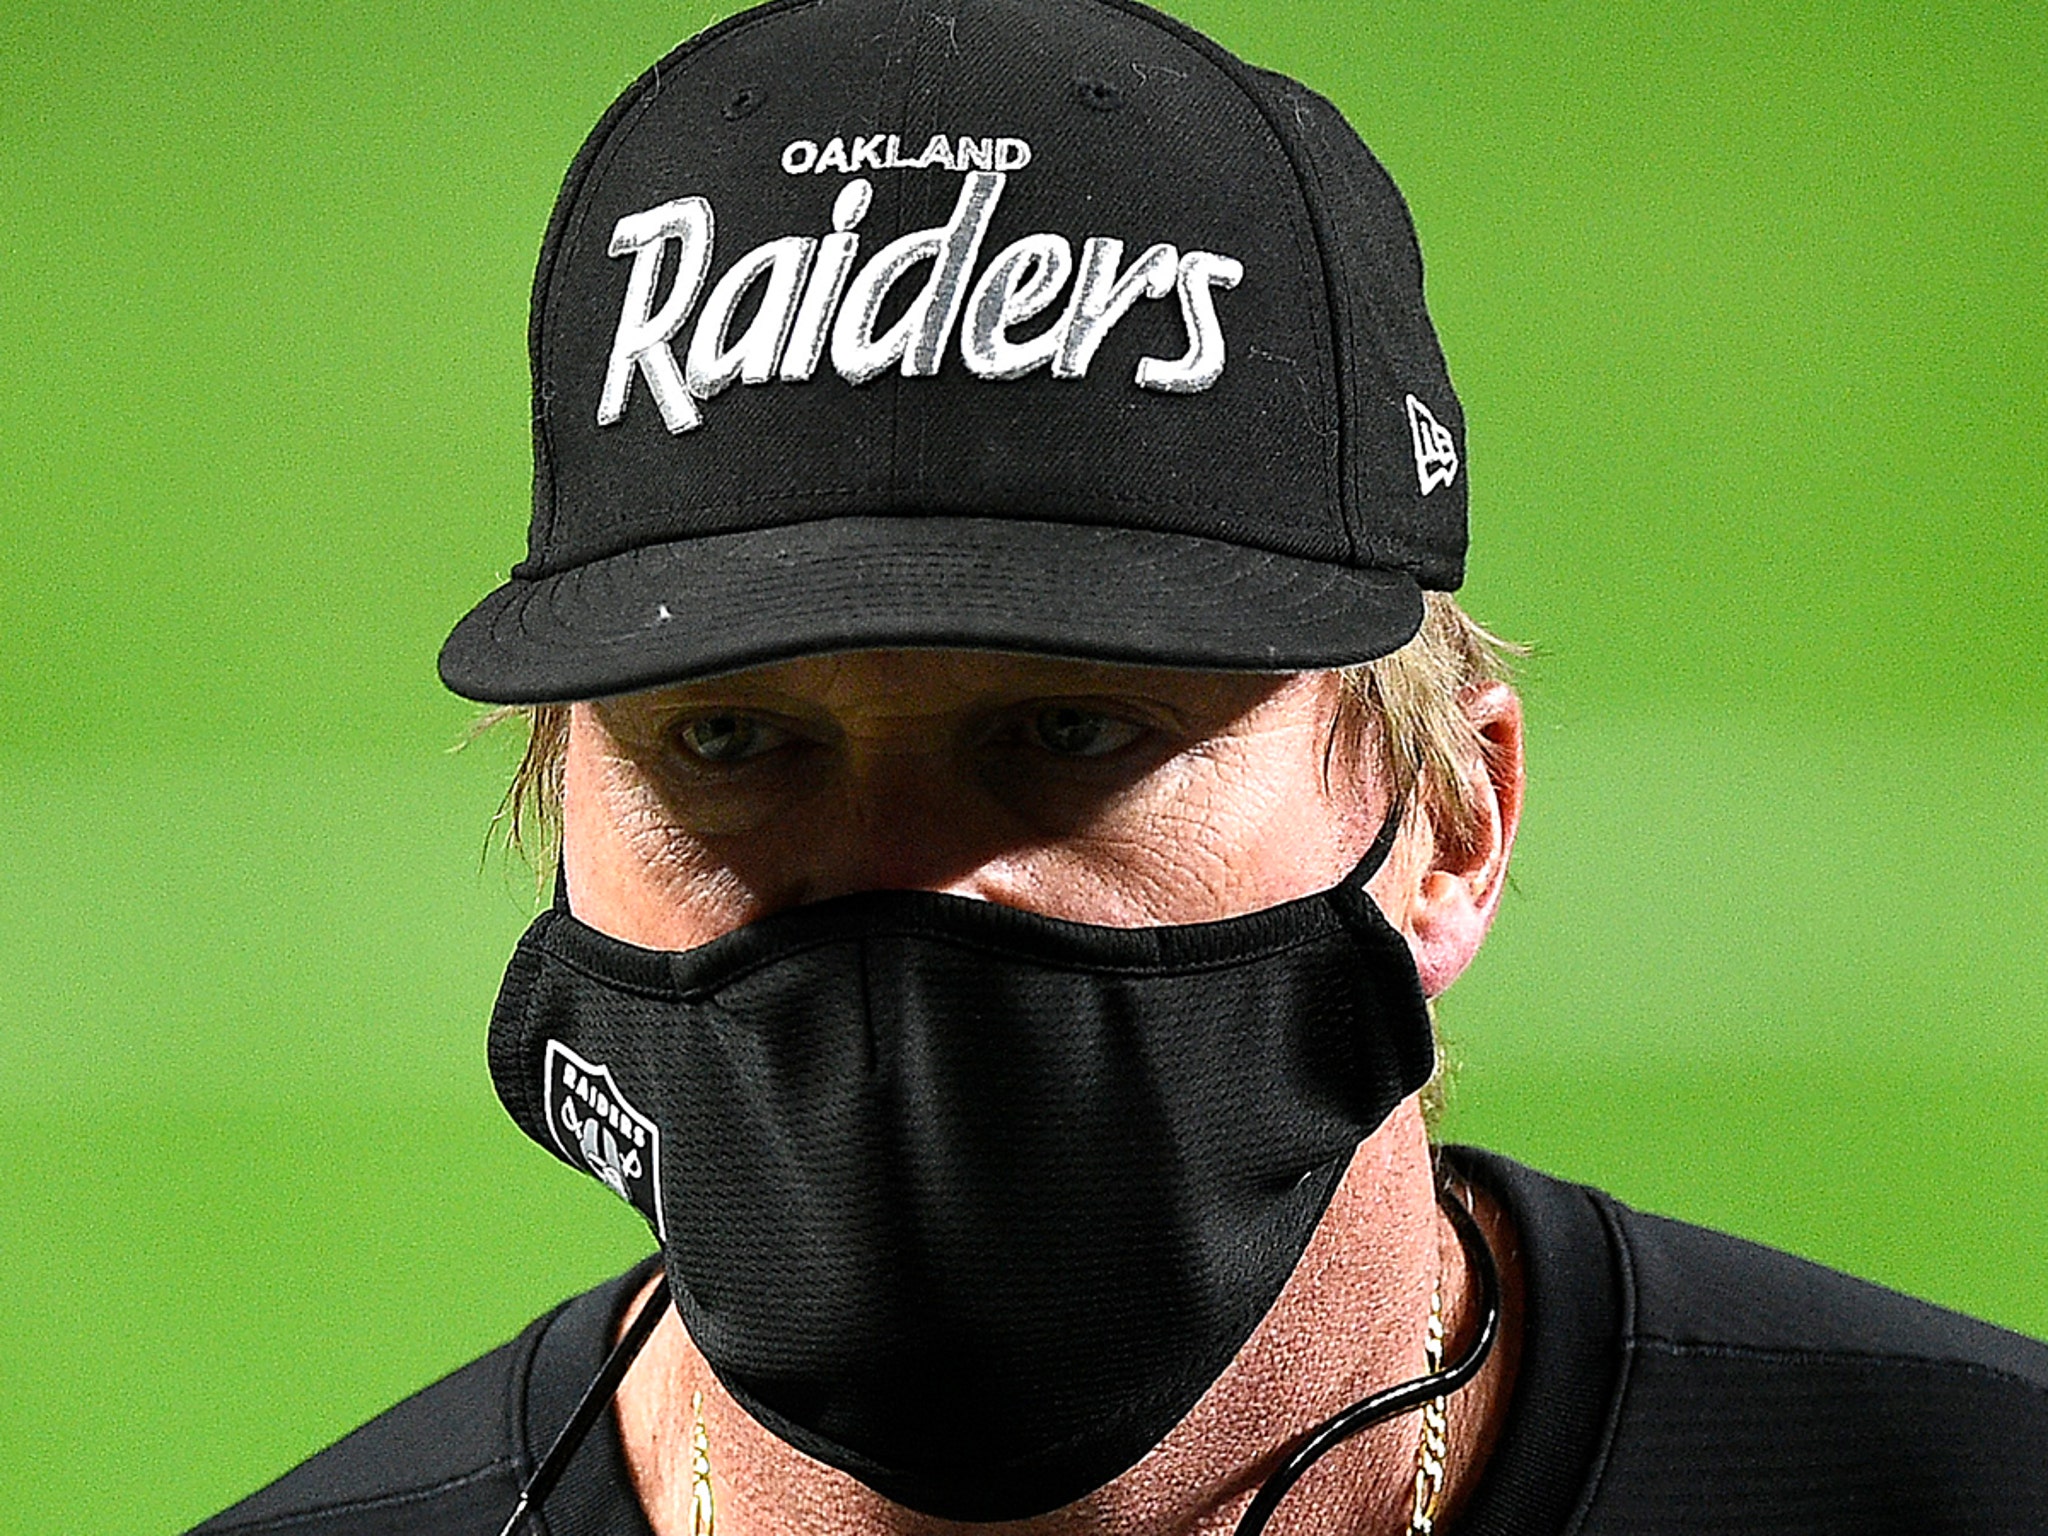 Photo: Jon Gruden's Hat For Tonight's Game Going Viral - The Spun